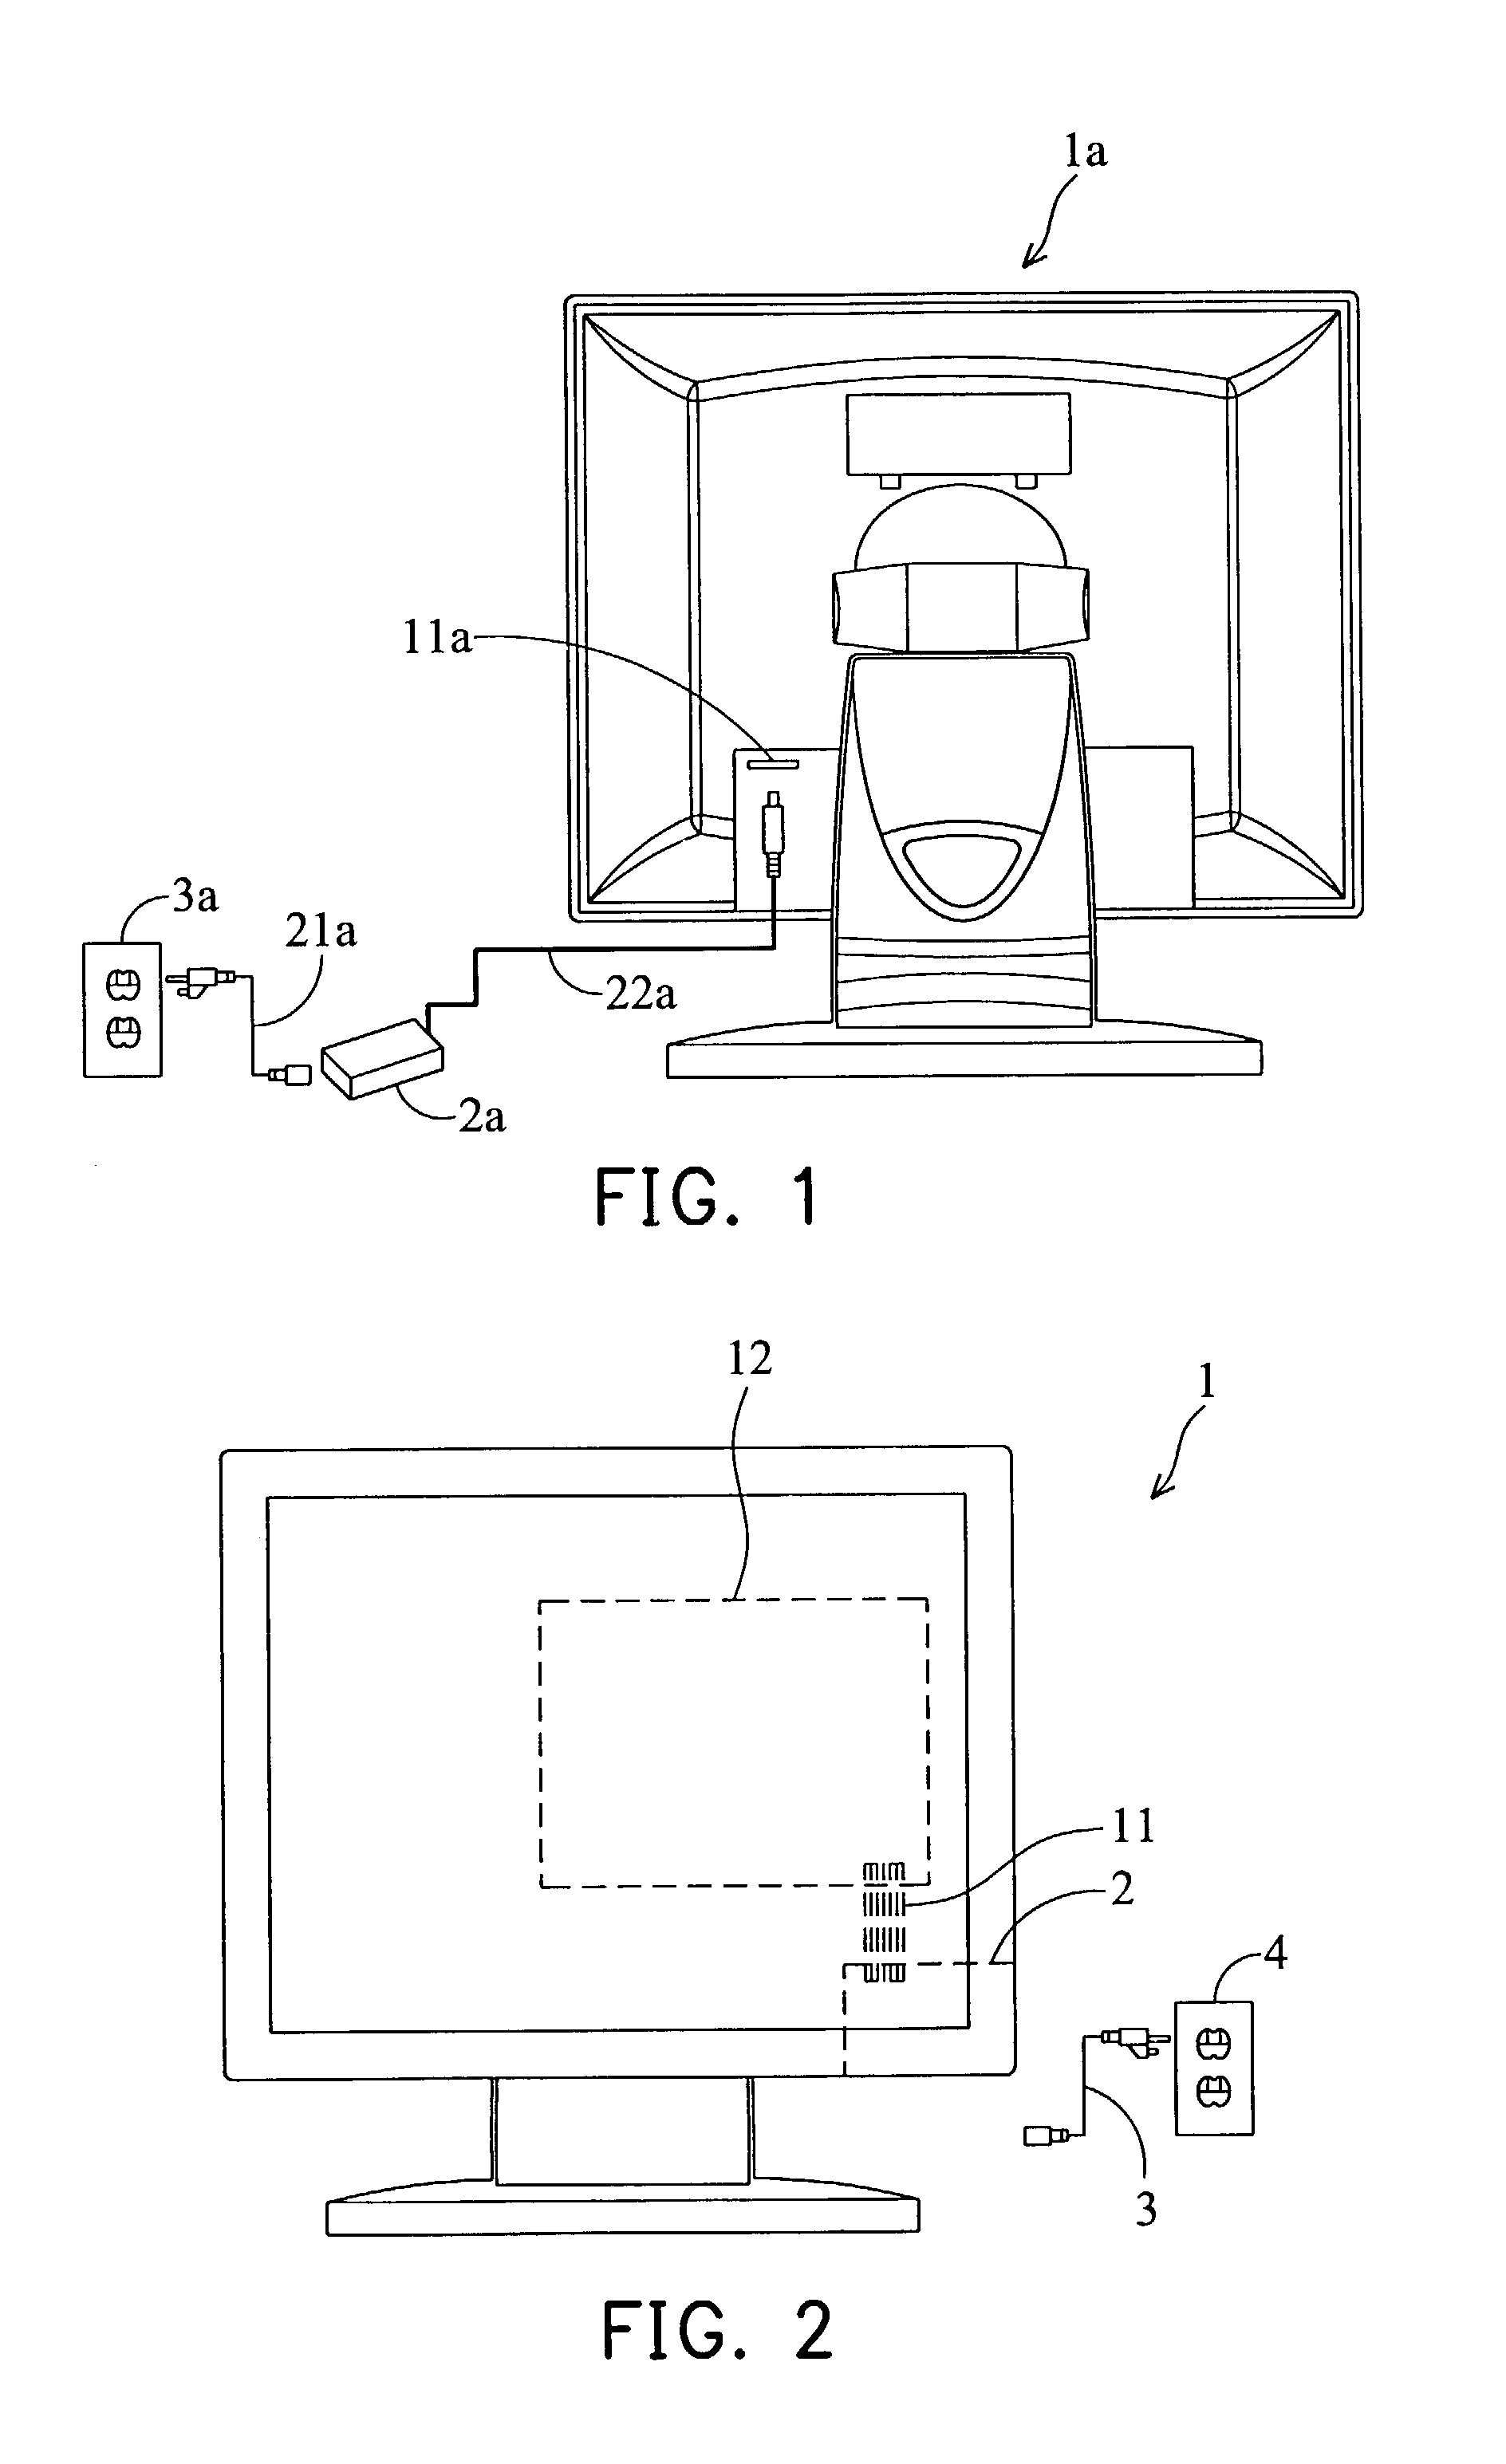 LCD with power conversion capability